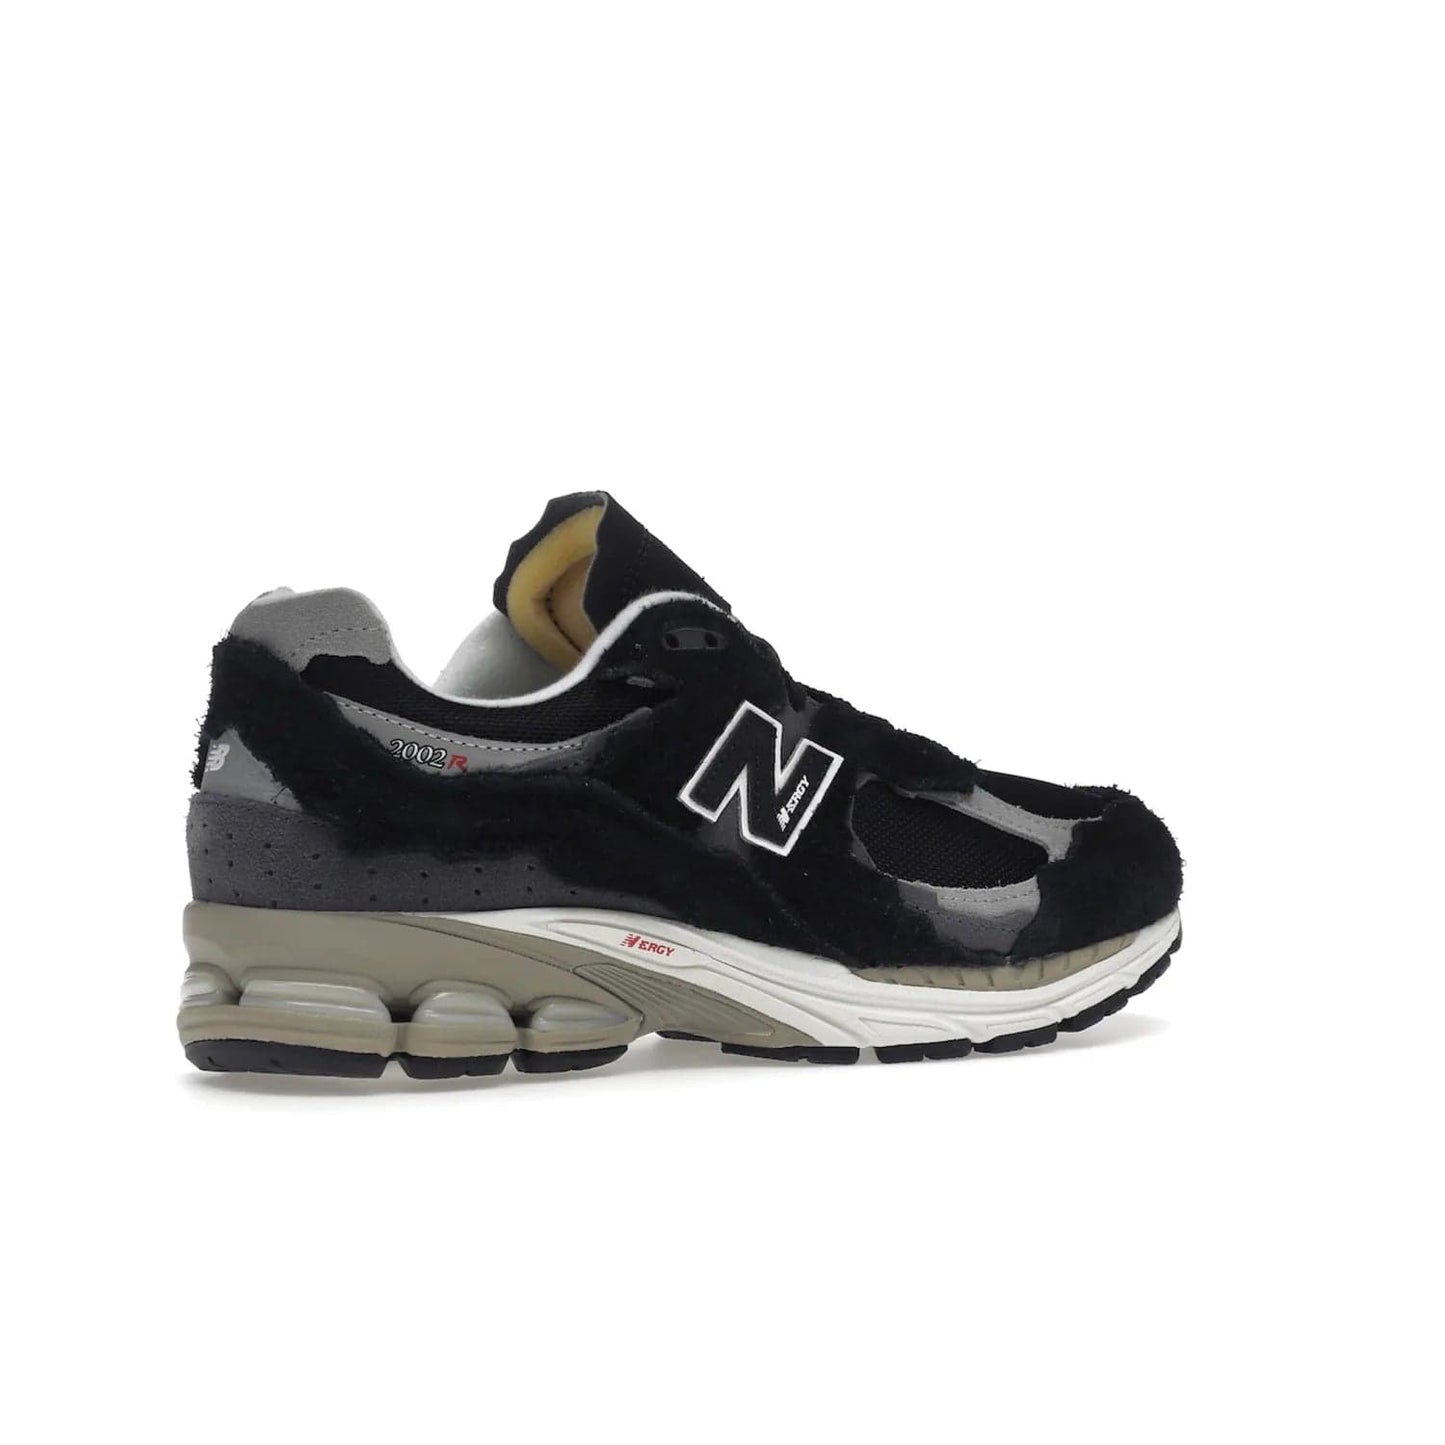 New Balance 2002R Protection Pack Black Grey - Image 34 - Only at www.BallersClubKickz.com - Look stylish in the New Balance 2002R Protection Pack Black Grey. Uppers constructed from premium materials like mesh and synthetic overlays. Iconic "N" emblem appears in white and black. ABZORB midsole for shock absorption and responsiveness. Black outsole for grip and traction. Lacing system offers customized fit and cushioned tongue and collar offer comfort and stability. Step up your style with this must-hav